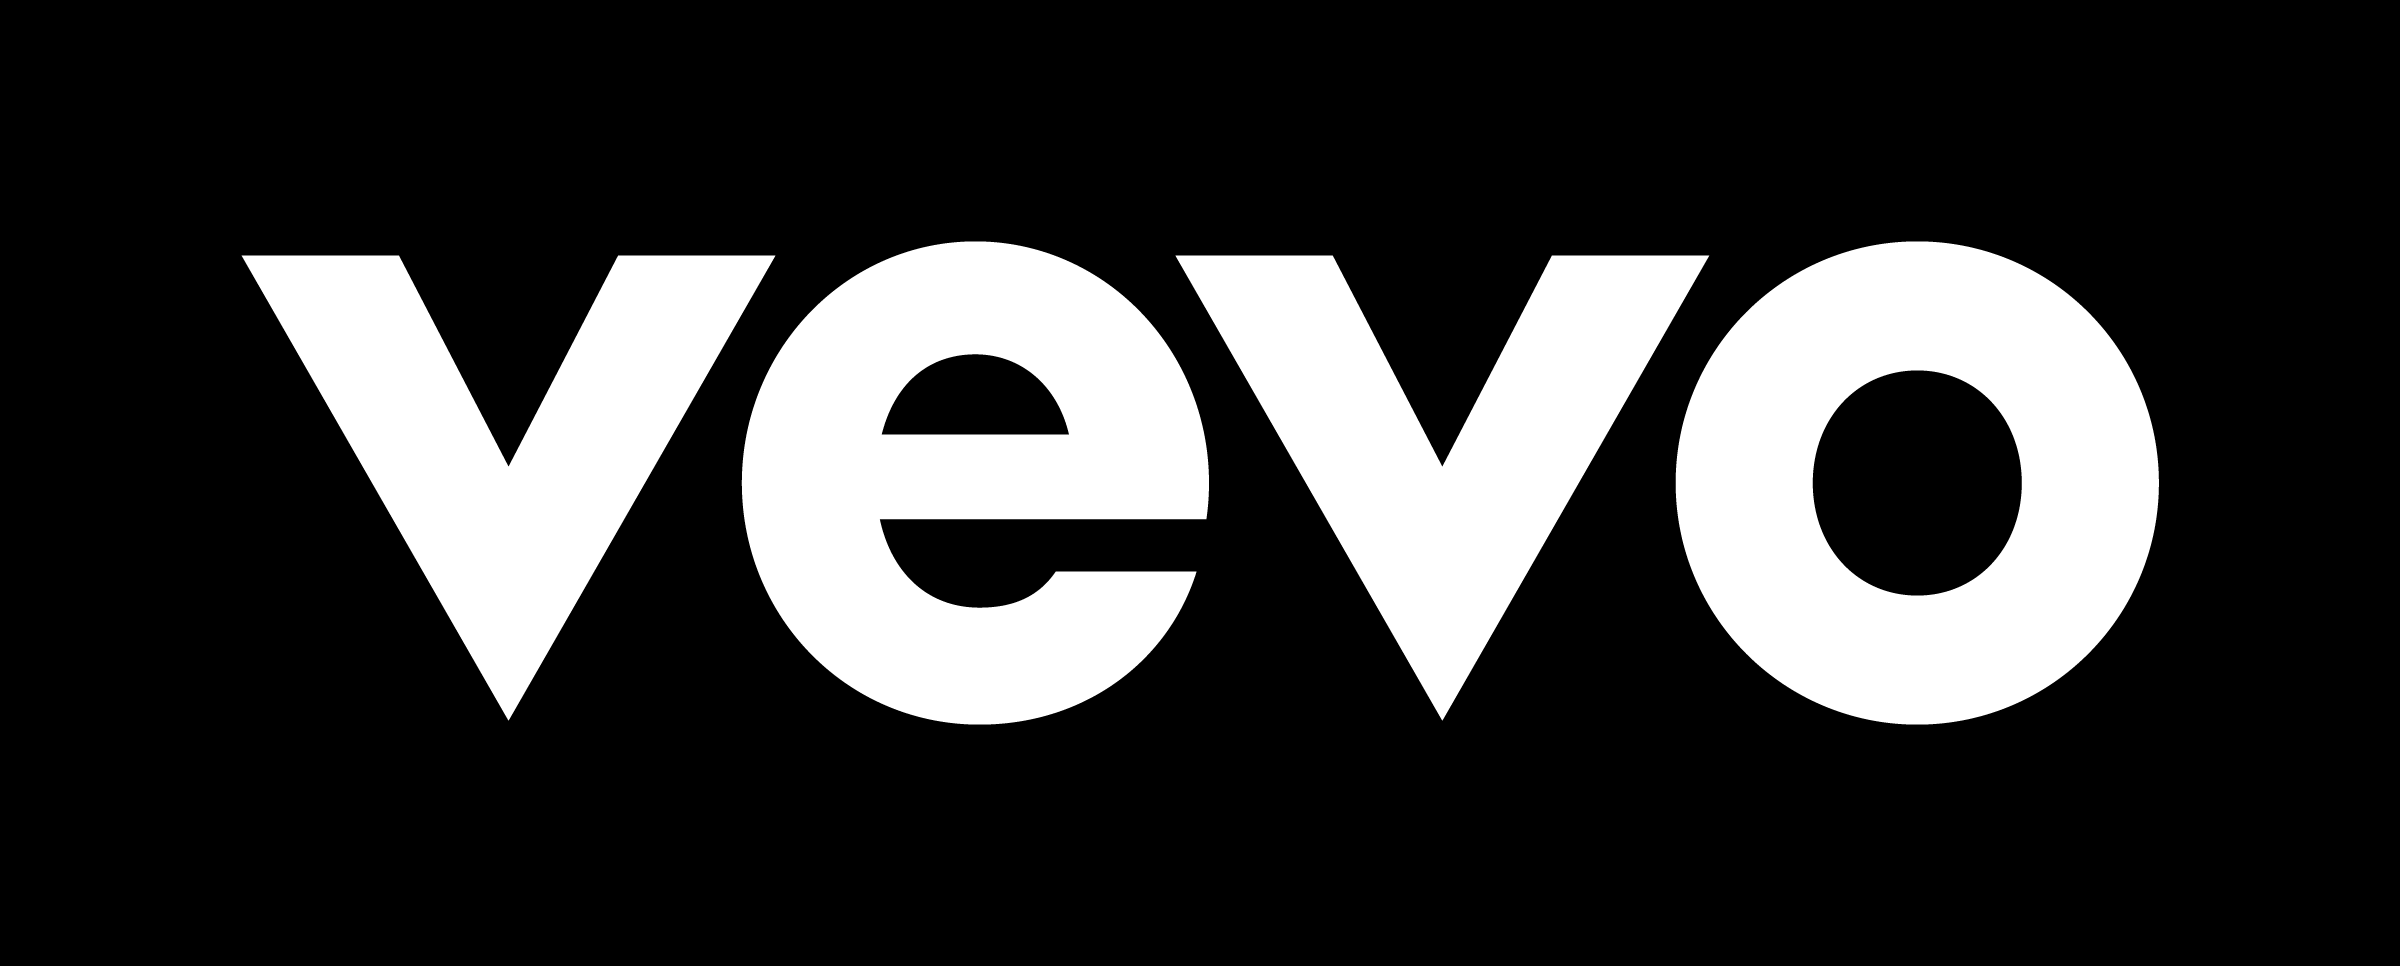 Vevo App Launches on Google TV and Android TV OS Devices